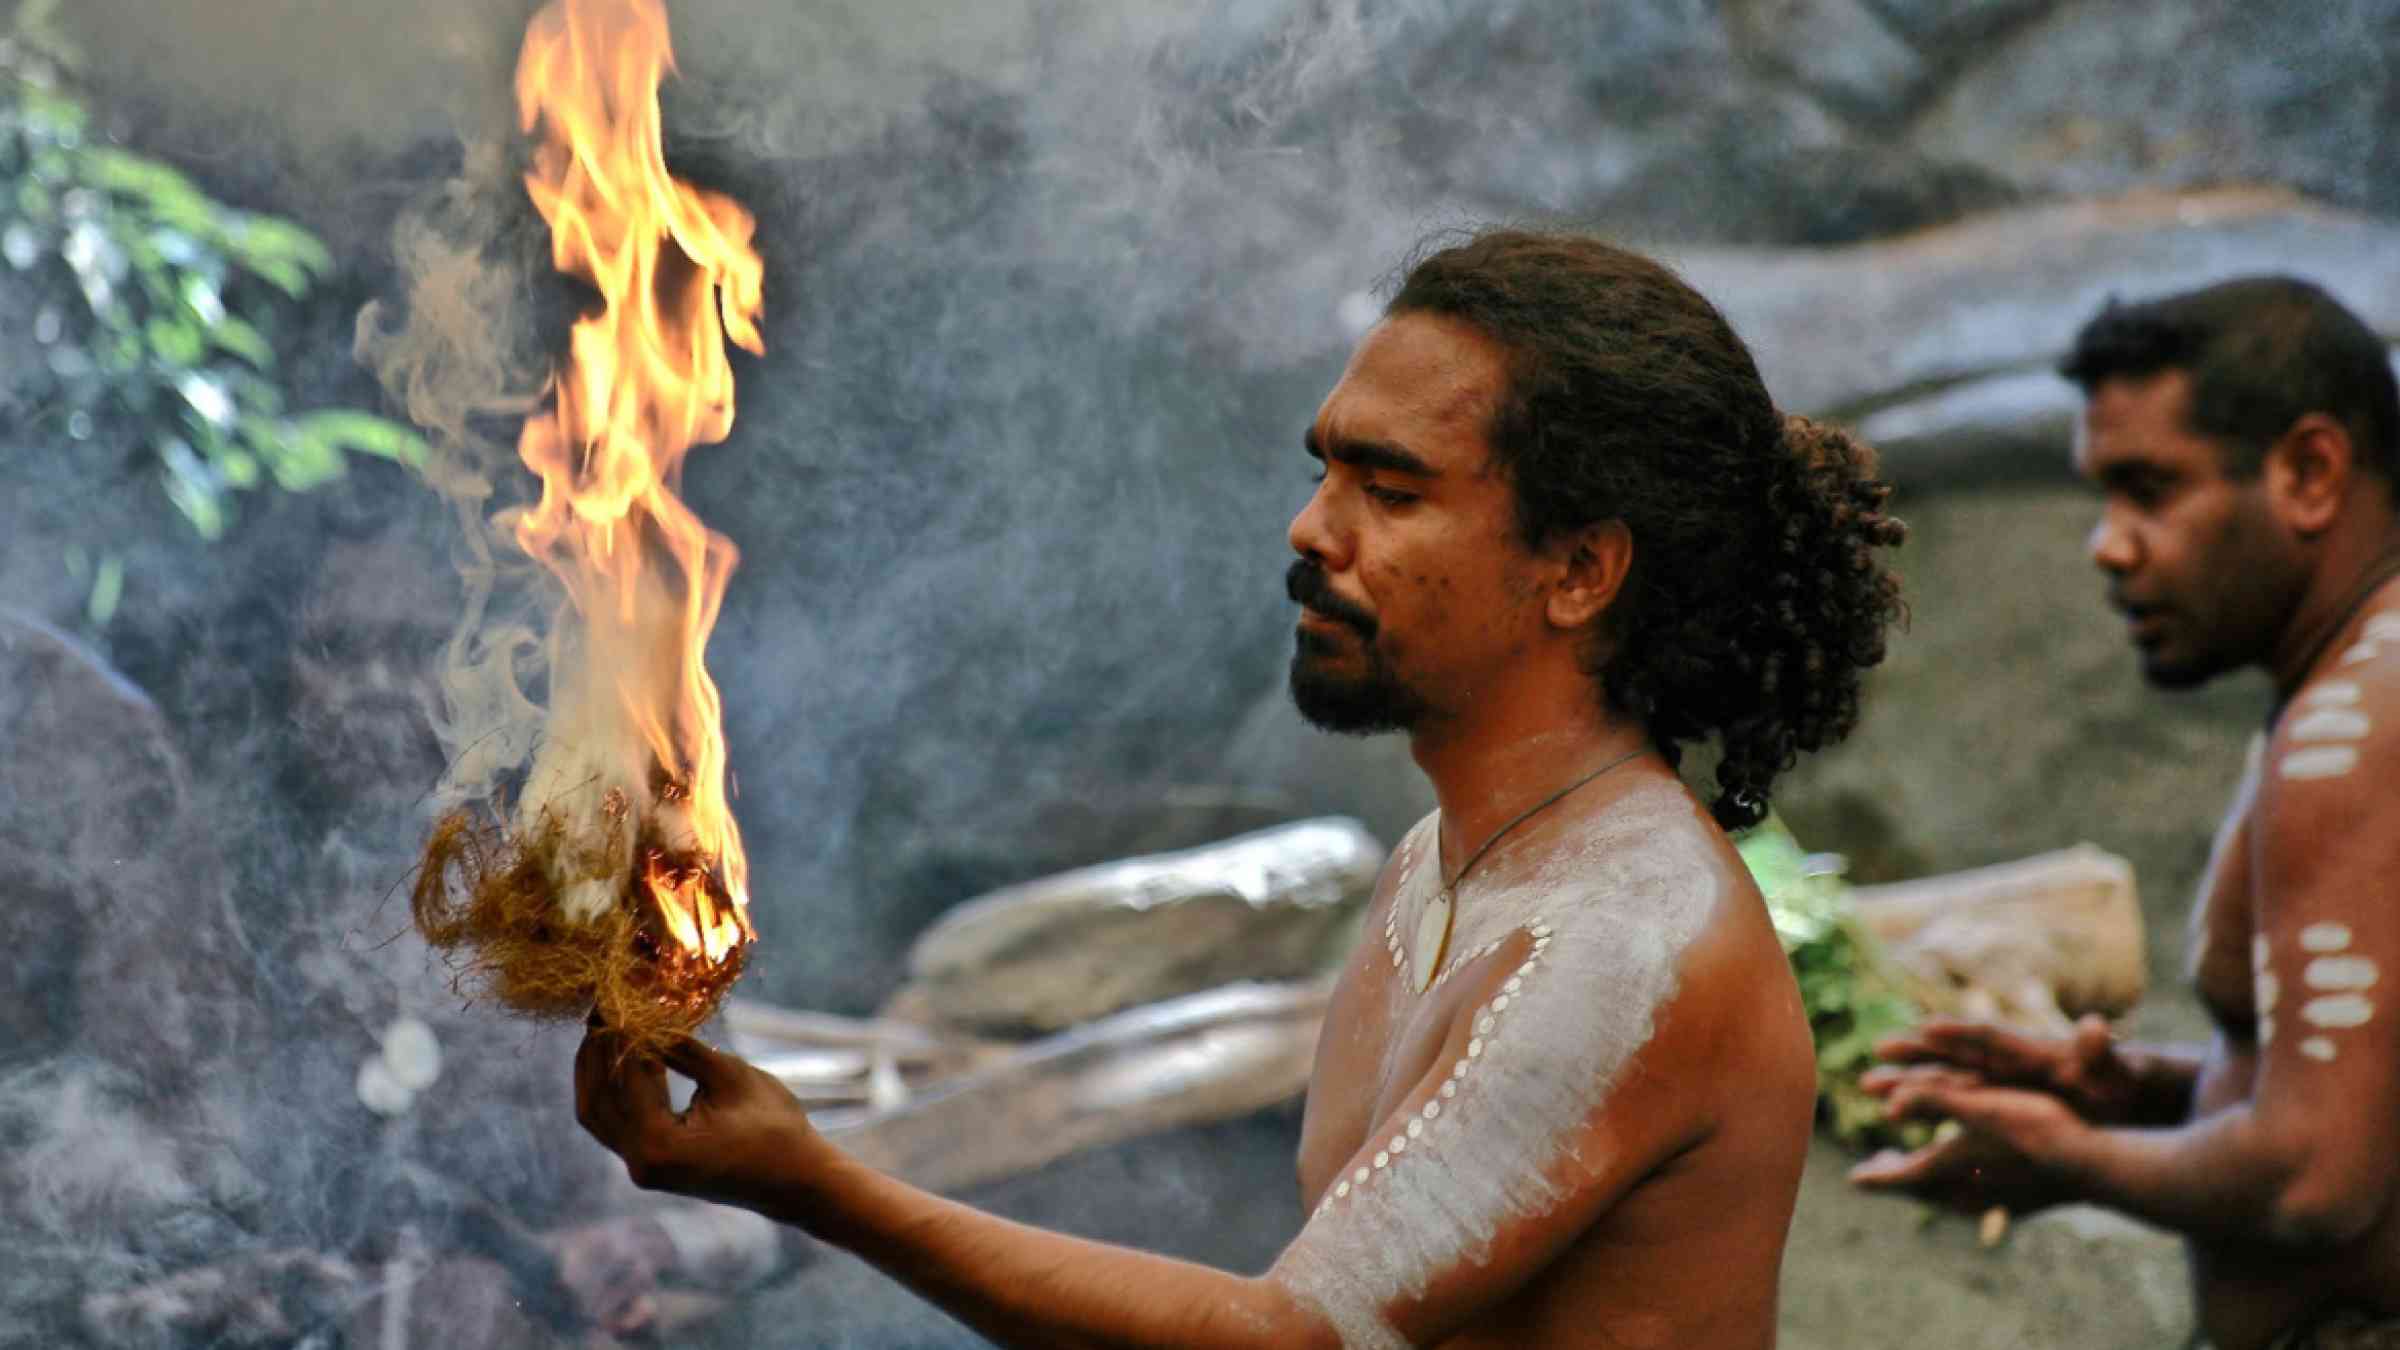 Australian native performing traditional ritual with fire.